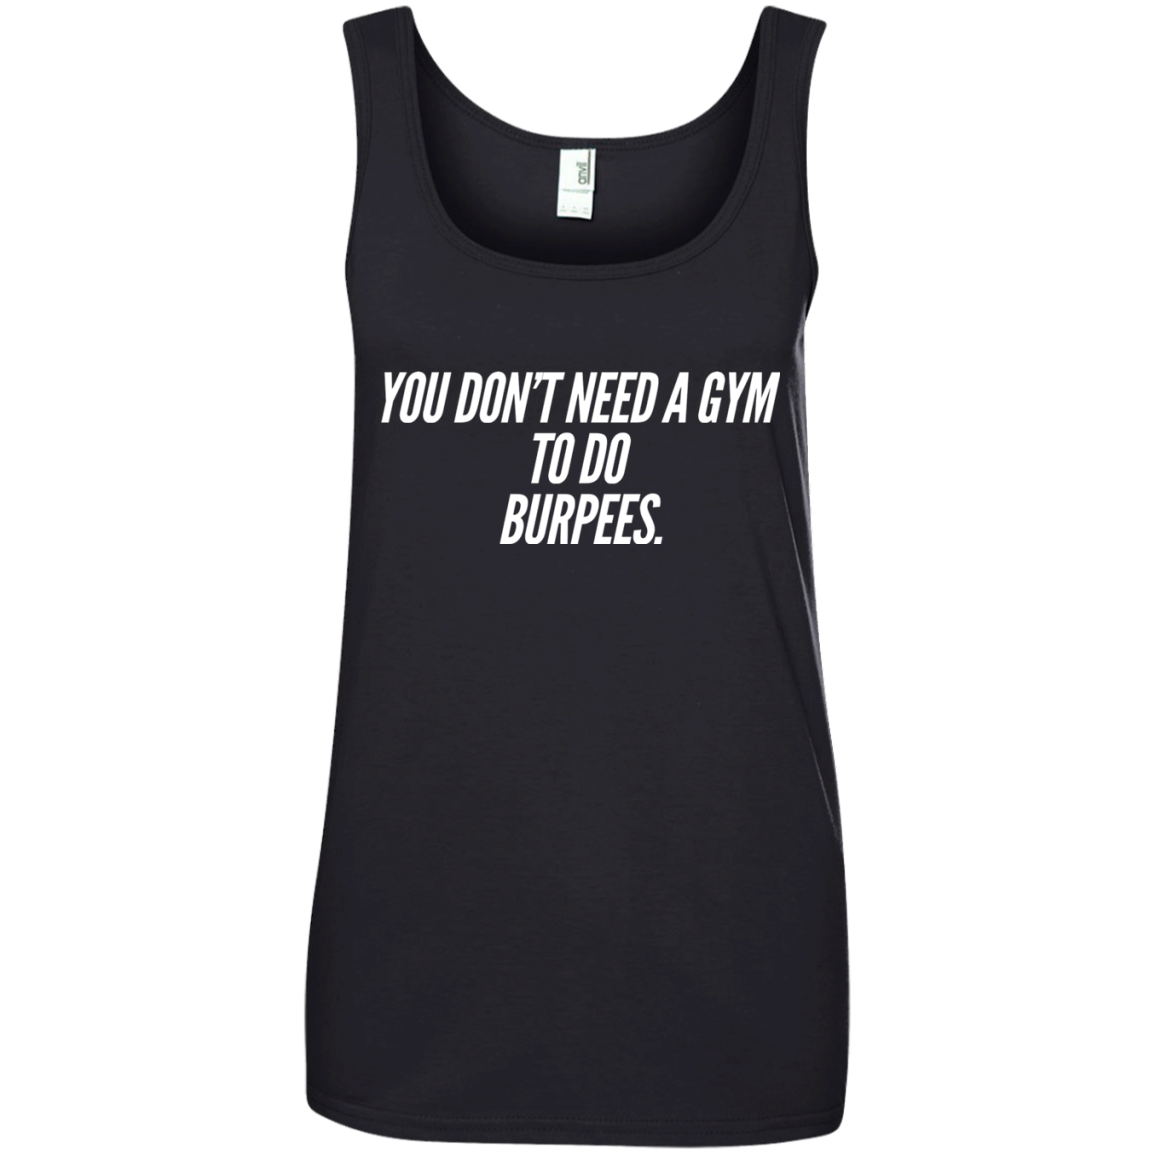 For the burpees fanatic...